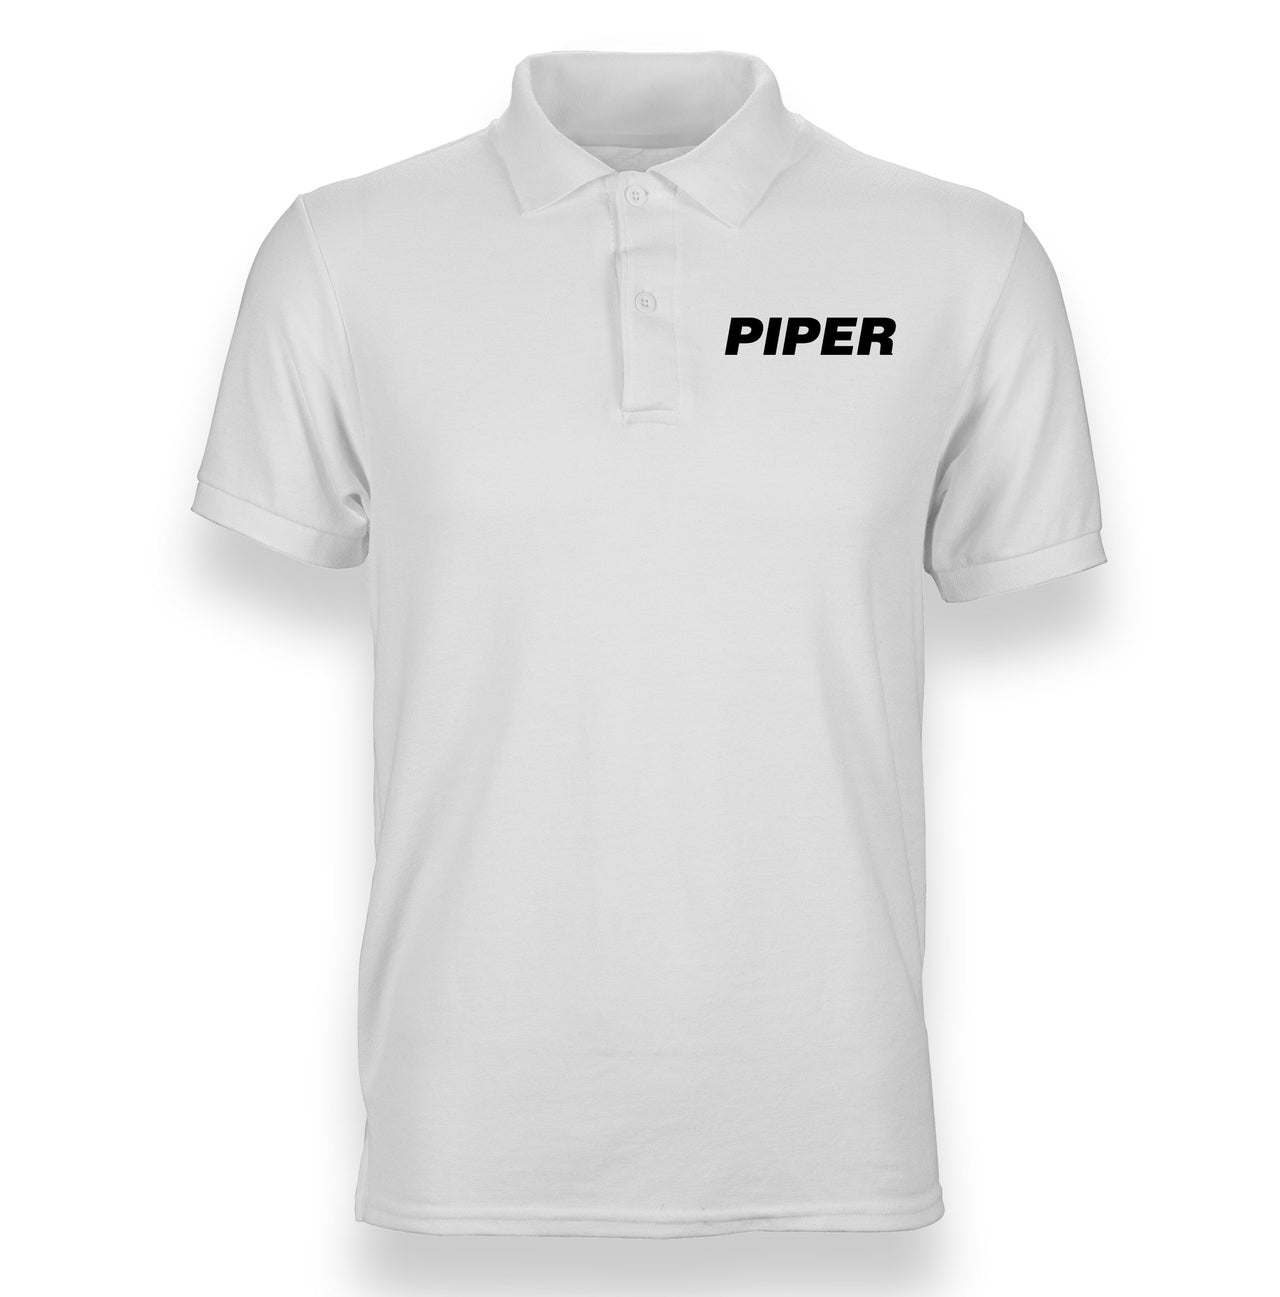 Piper & Text Designed Polo T-Shirts